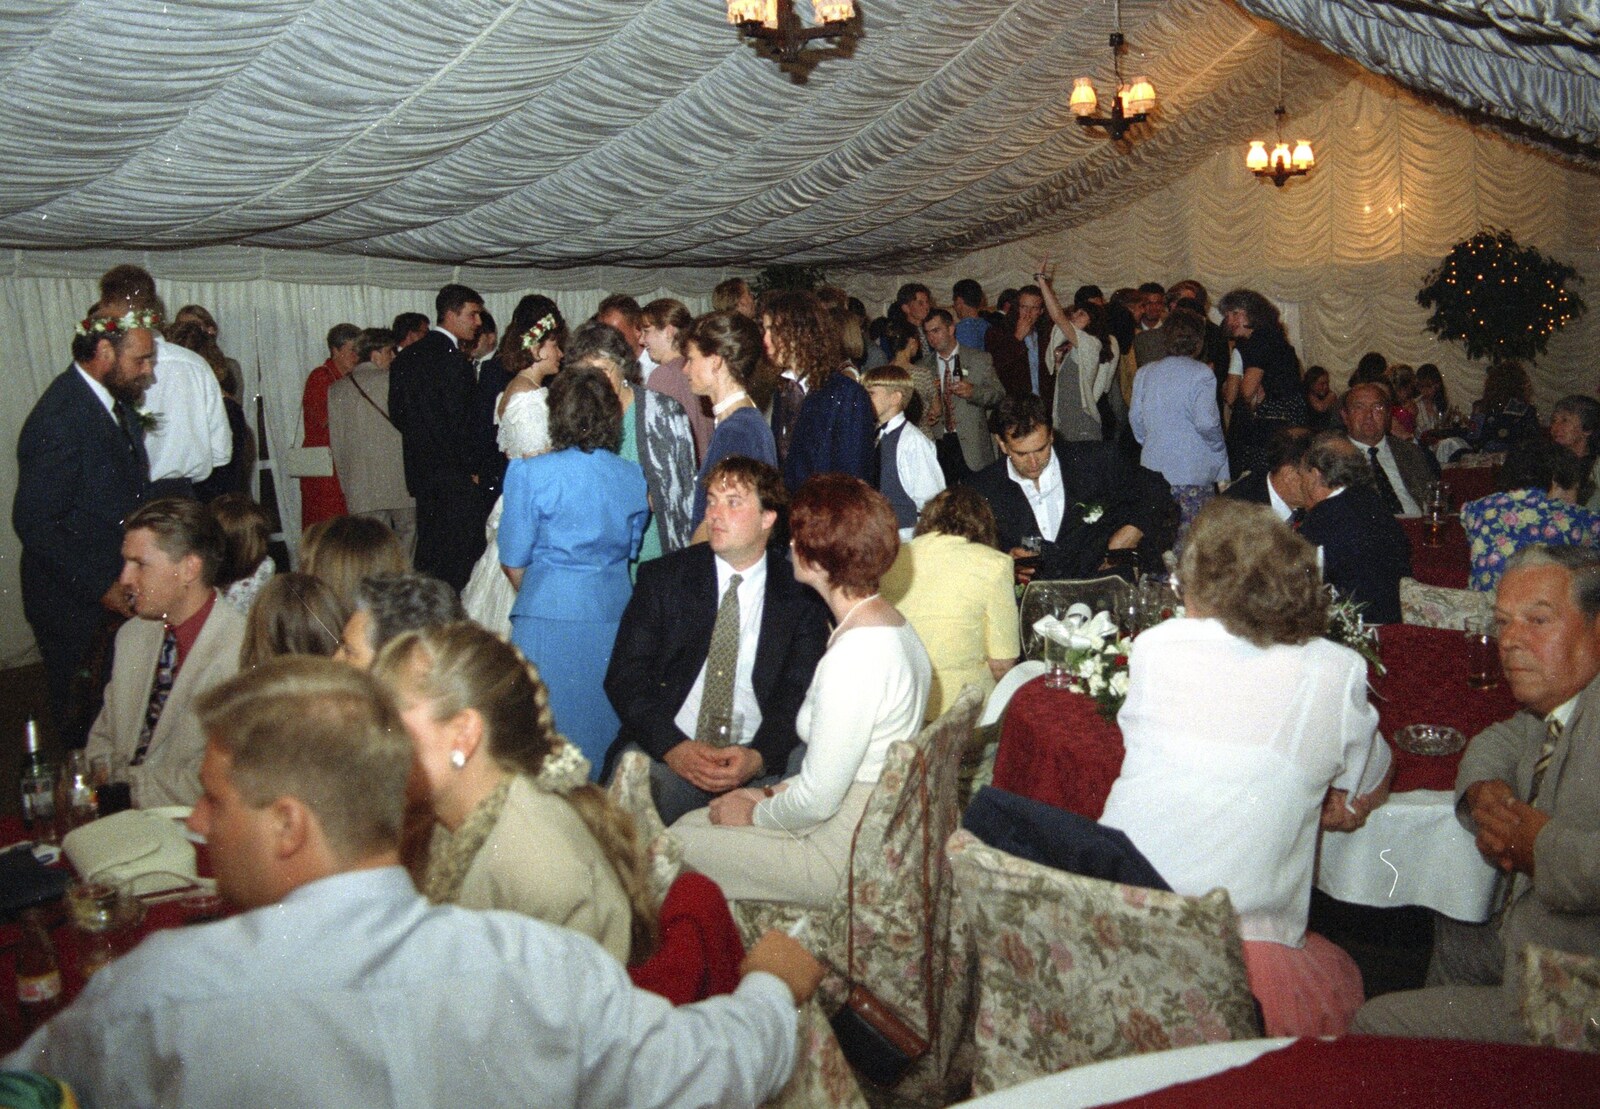 The wedding reception marquee from Bernie's Anniversary and Charlie's Wedding, Palgrave and Oakley, Suffolk - 19th July 1994